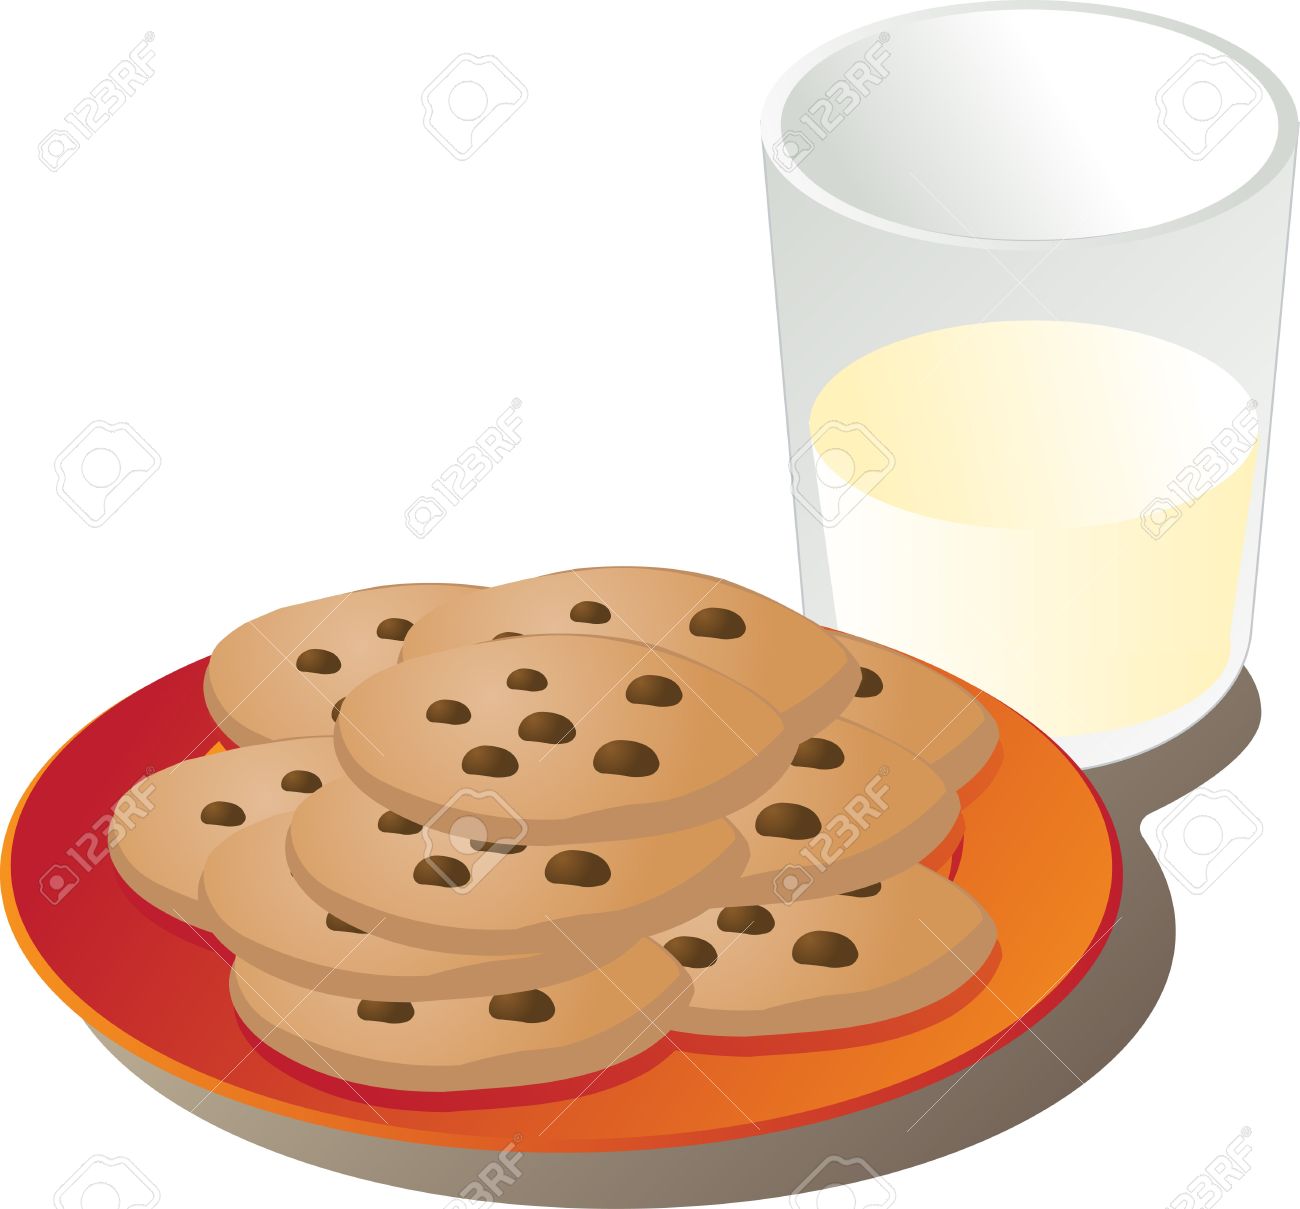 Plate of cookies clipart 7 » Clipart Station.